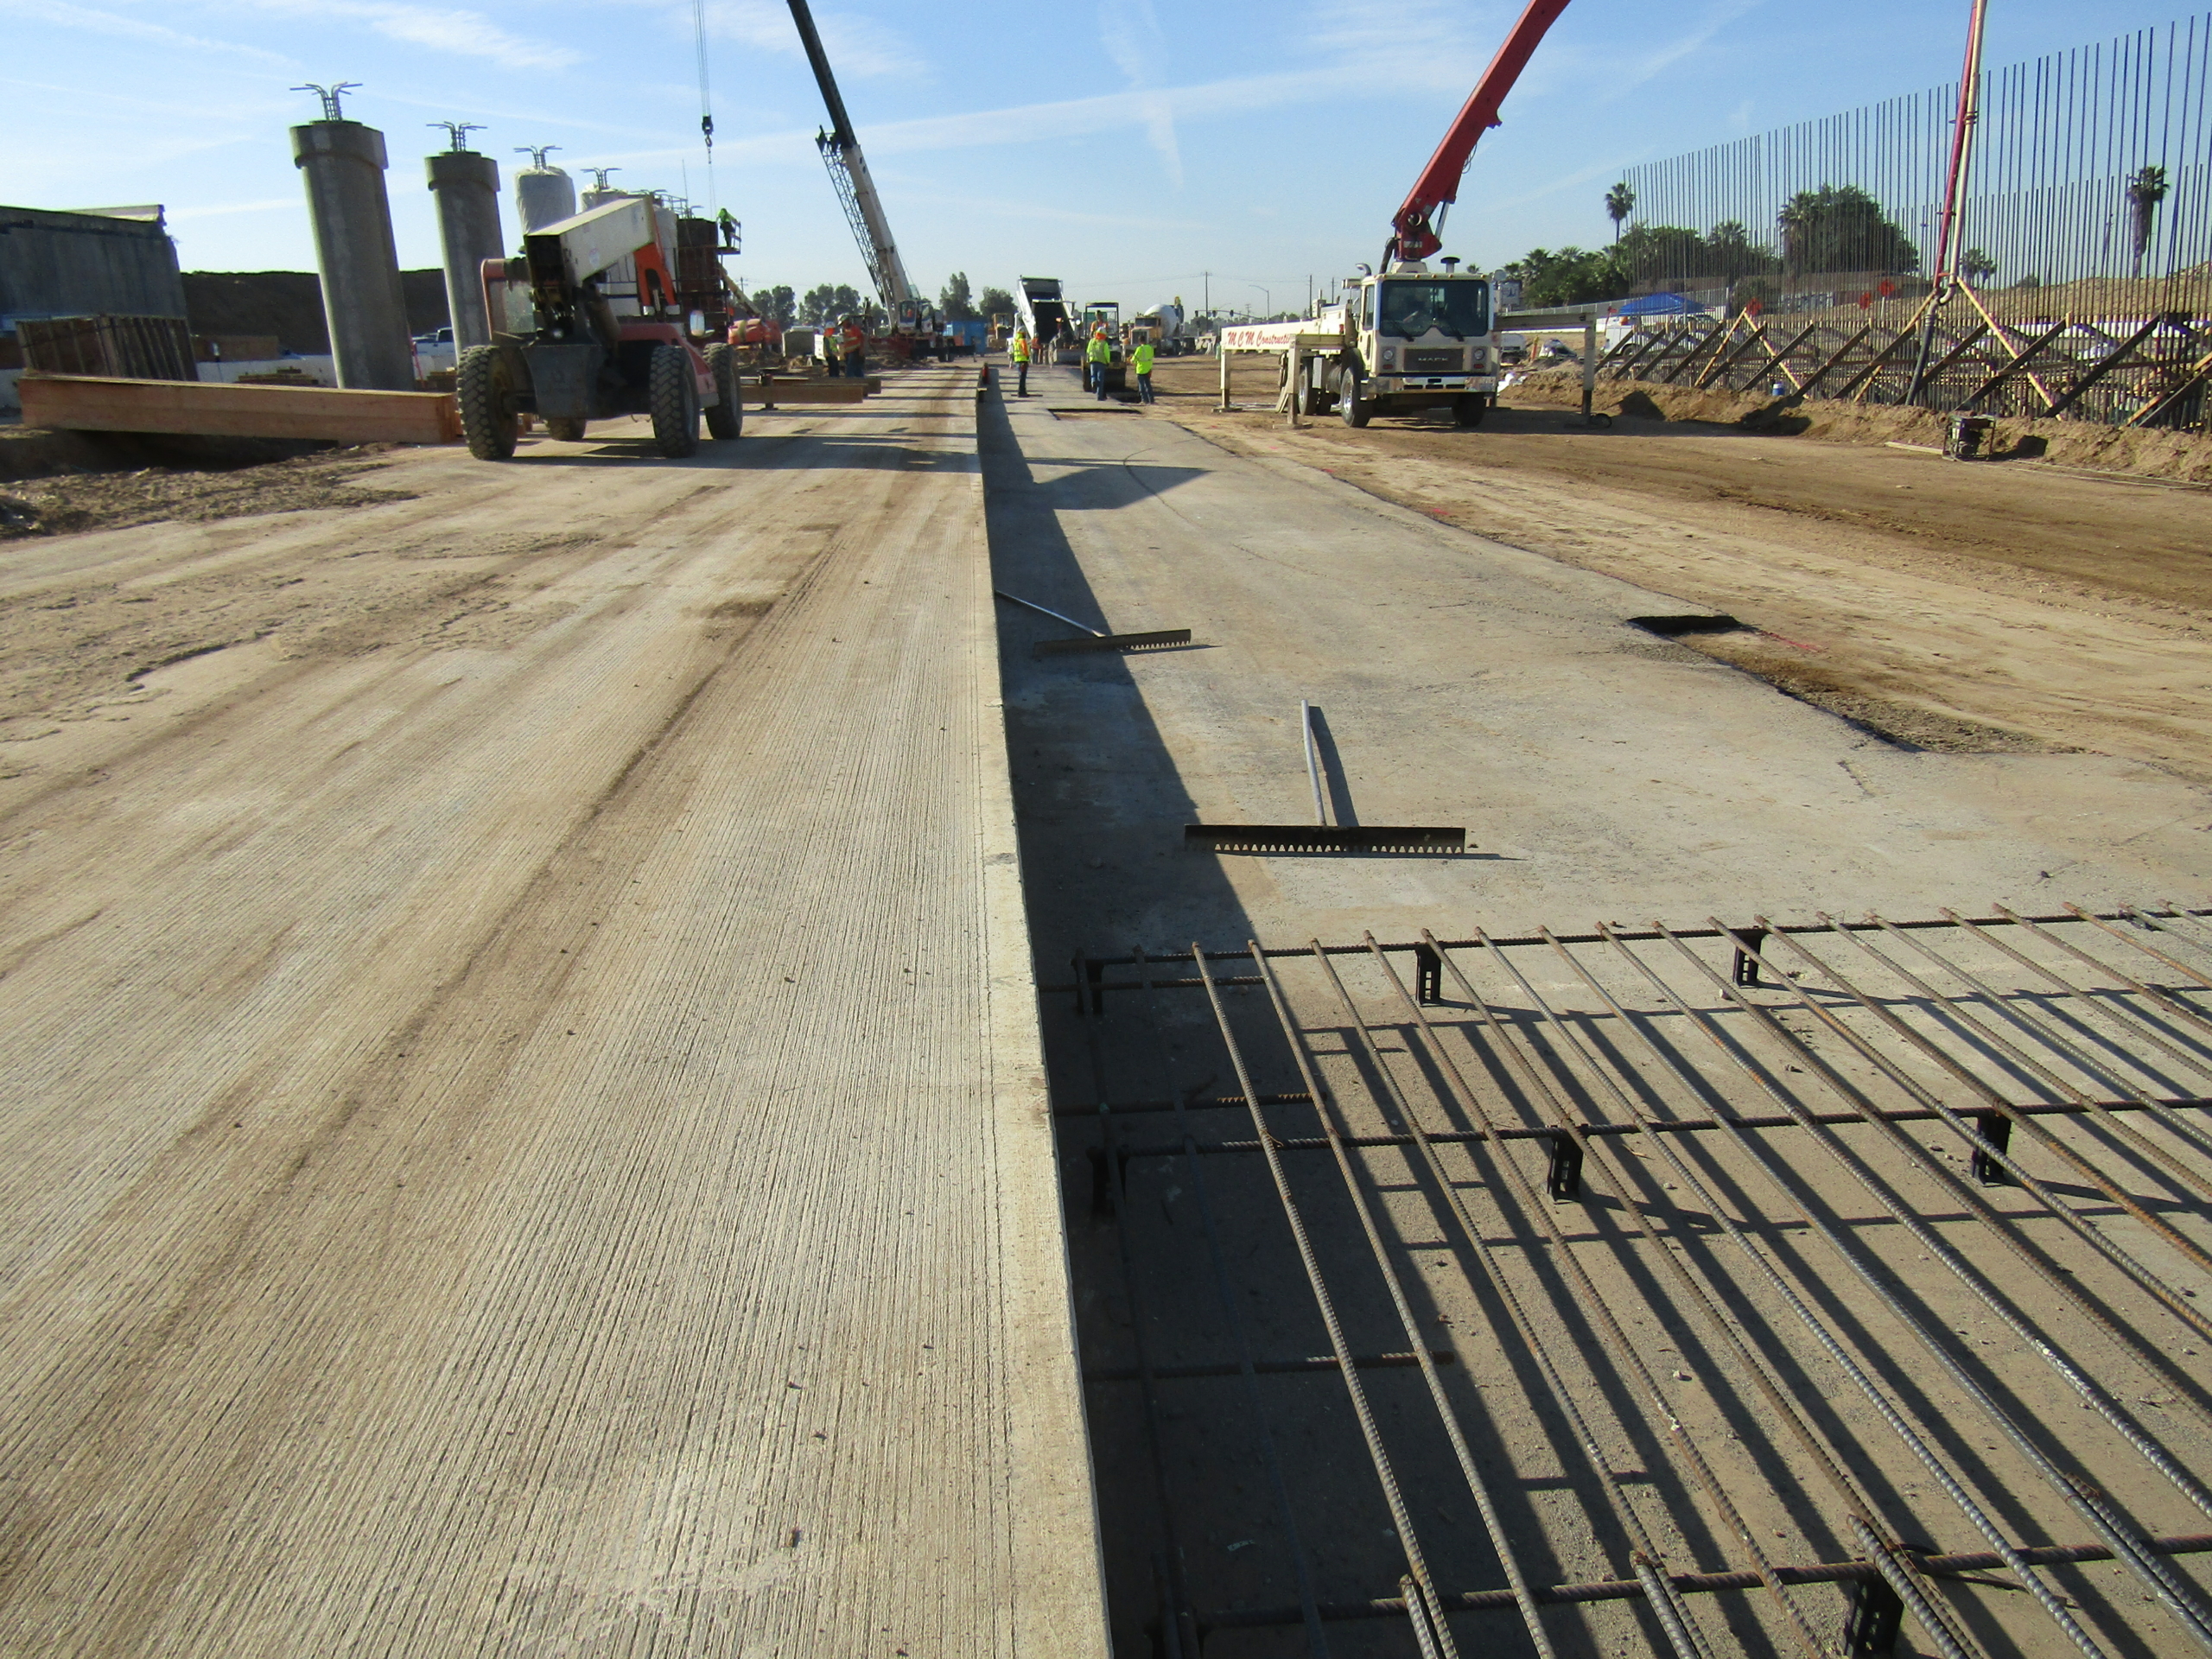 Construction on Highway 99